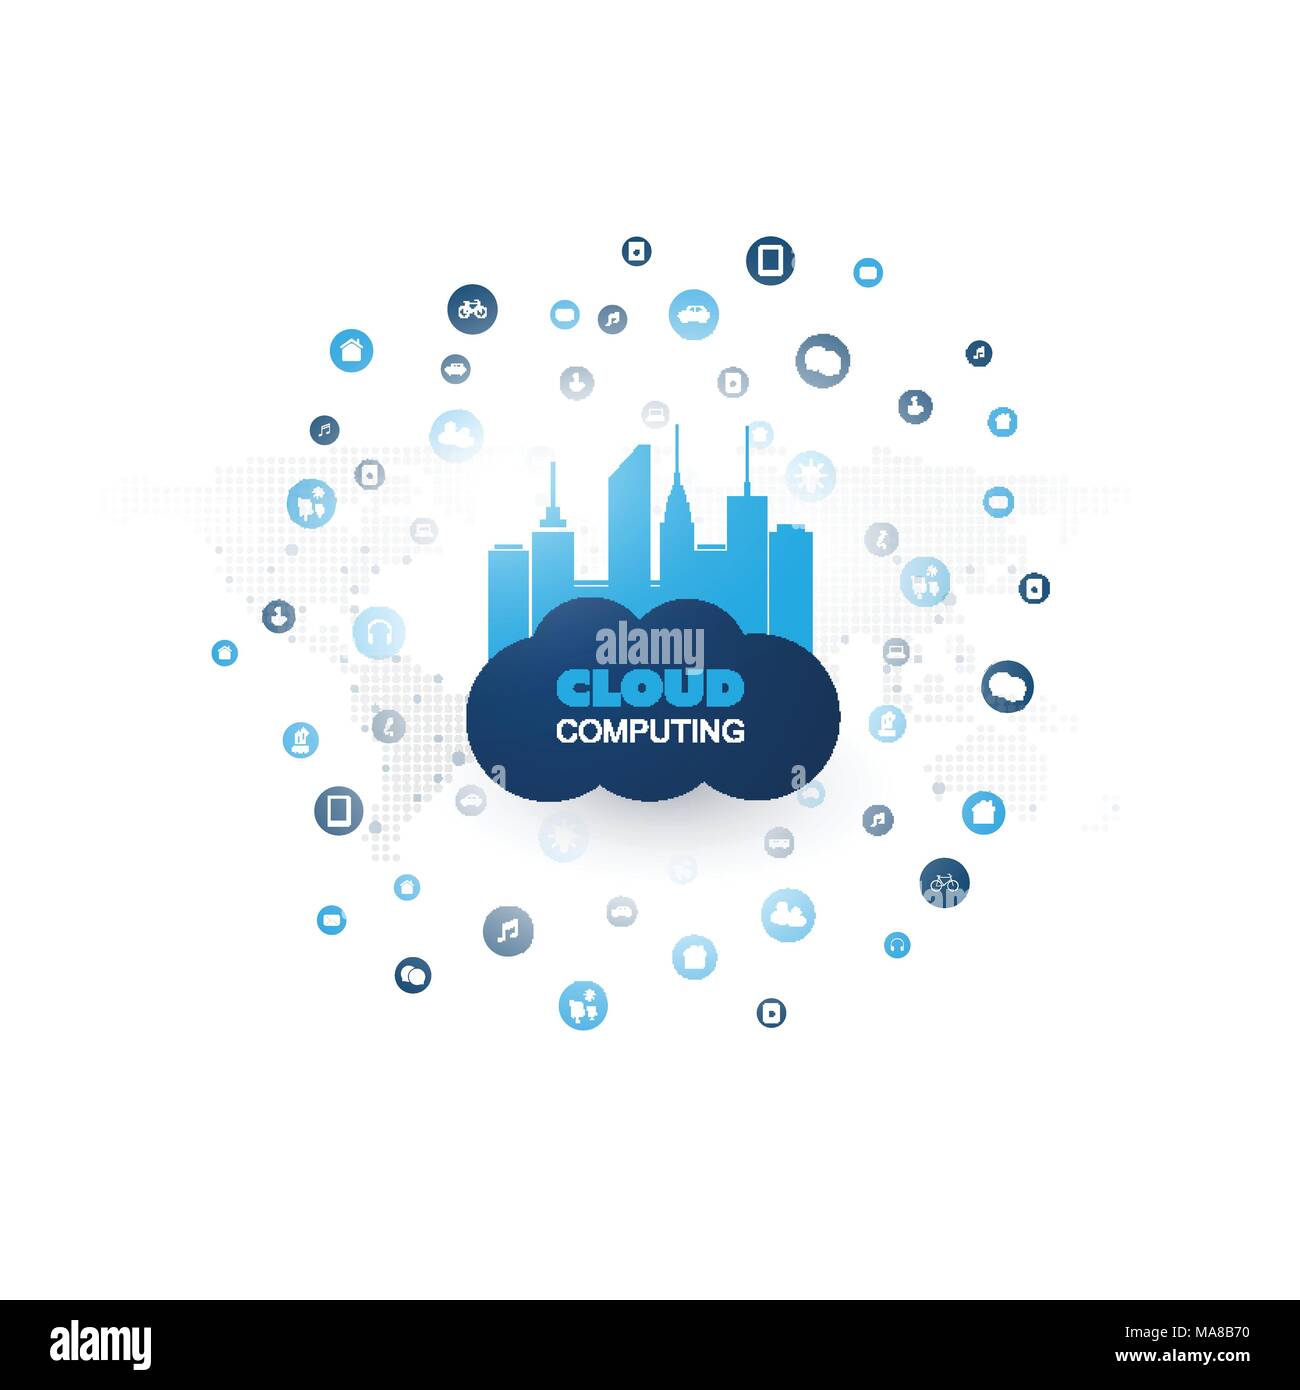 Cloud Computing Design Concept with Mesh, Connected Icons Representing Various Smart Devices and Services - Digital Network Connections, Technology Ba Stock Vector